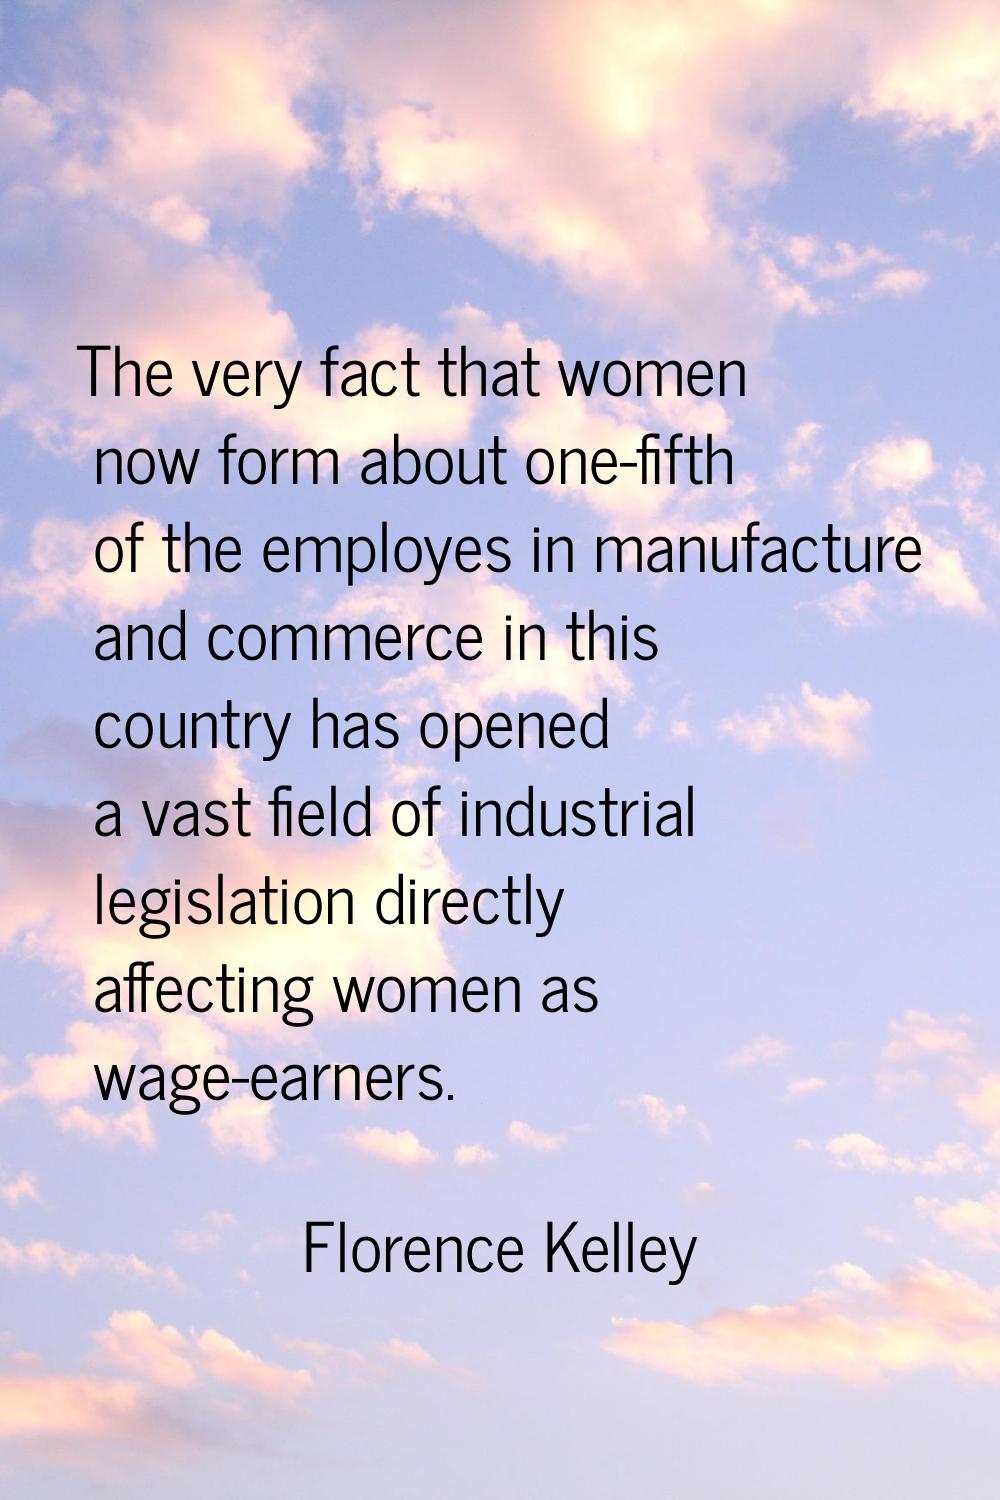 The very fact that women now form about one-fifth of the employes in manufacture and commerce in th